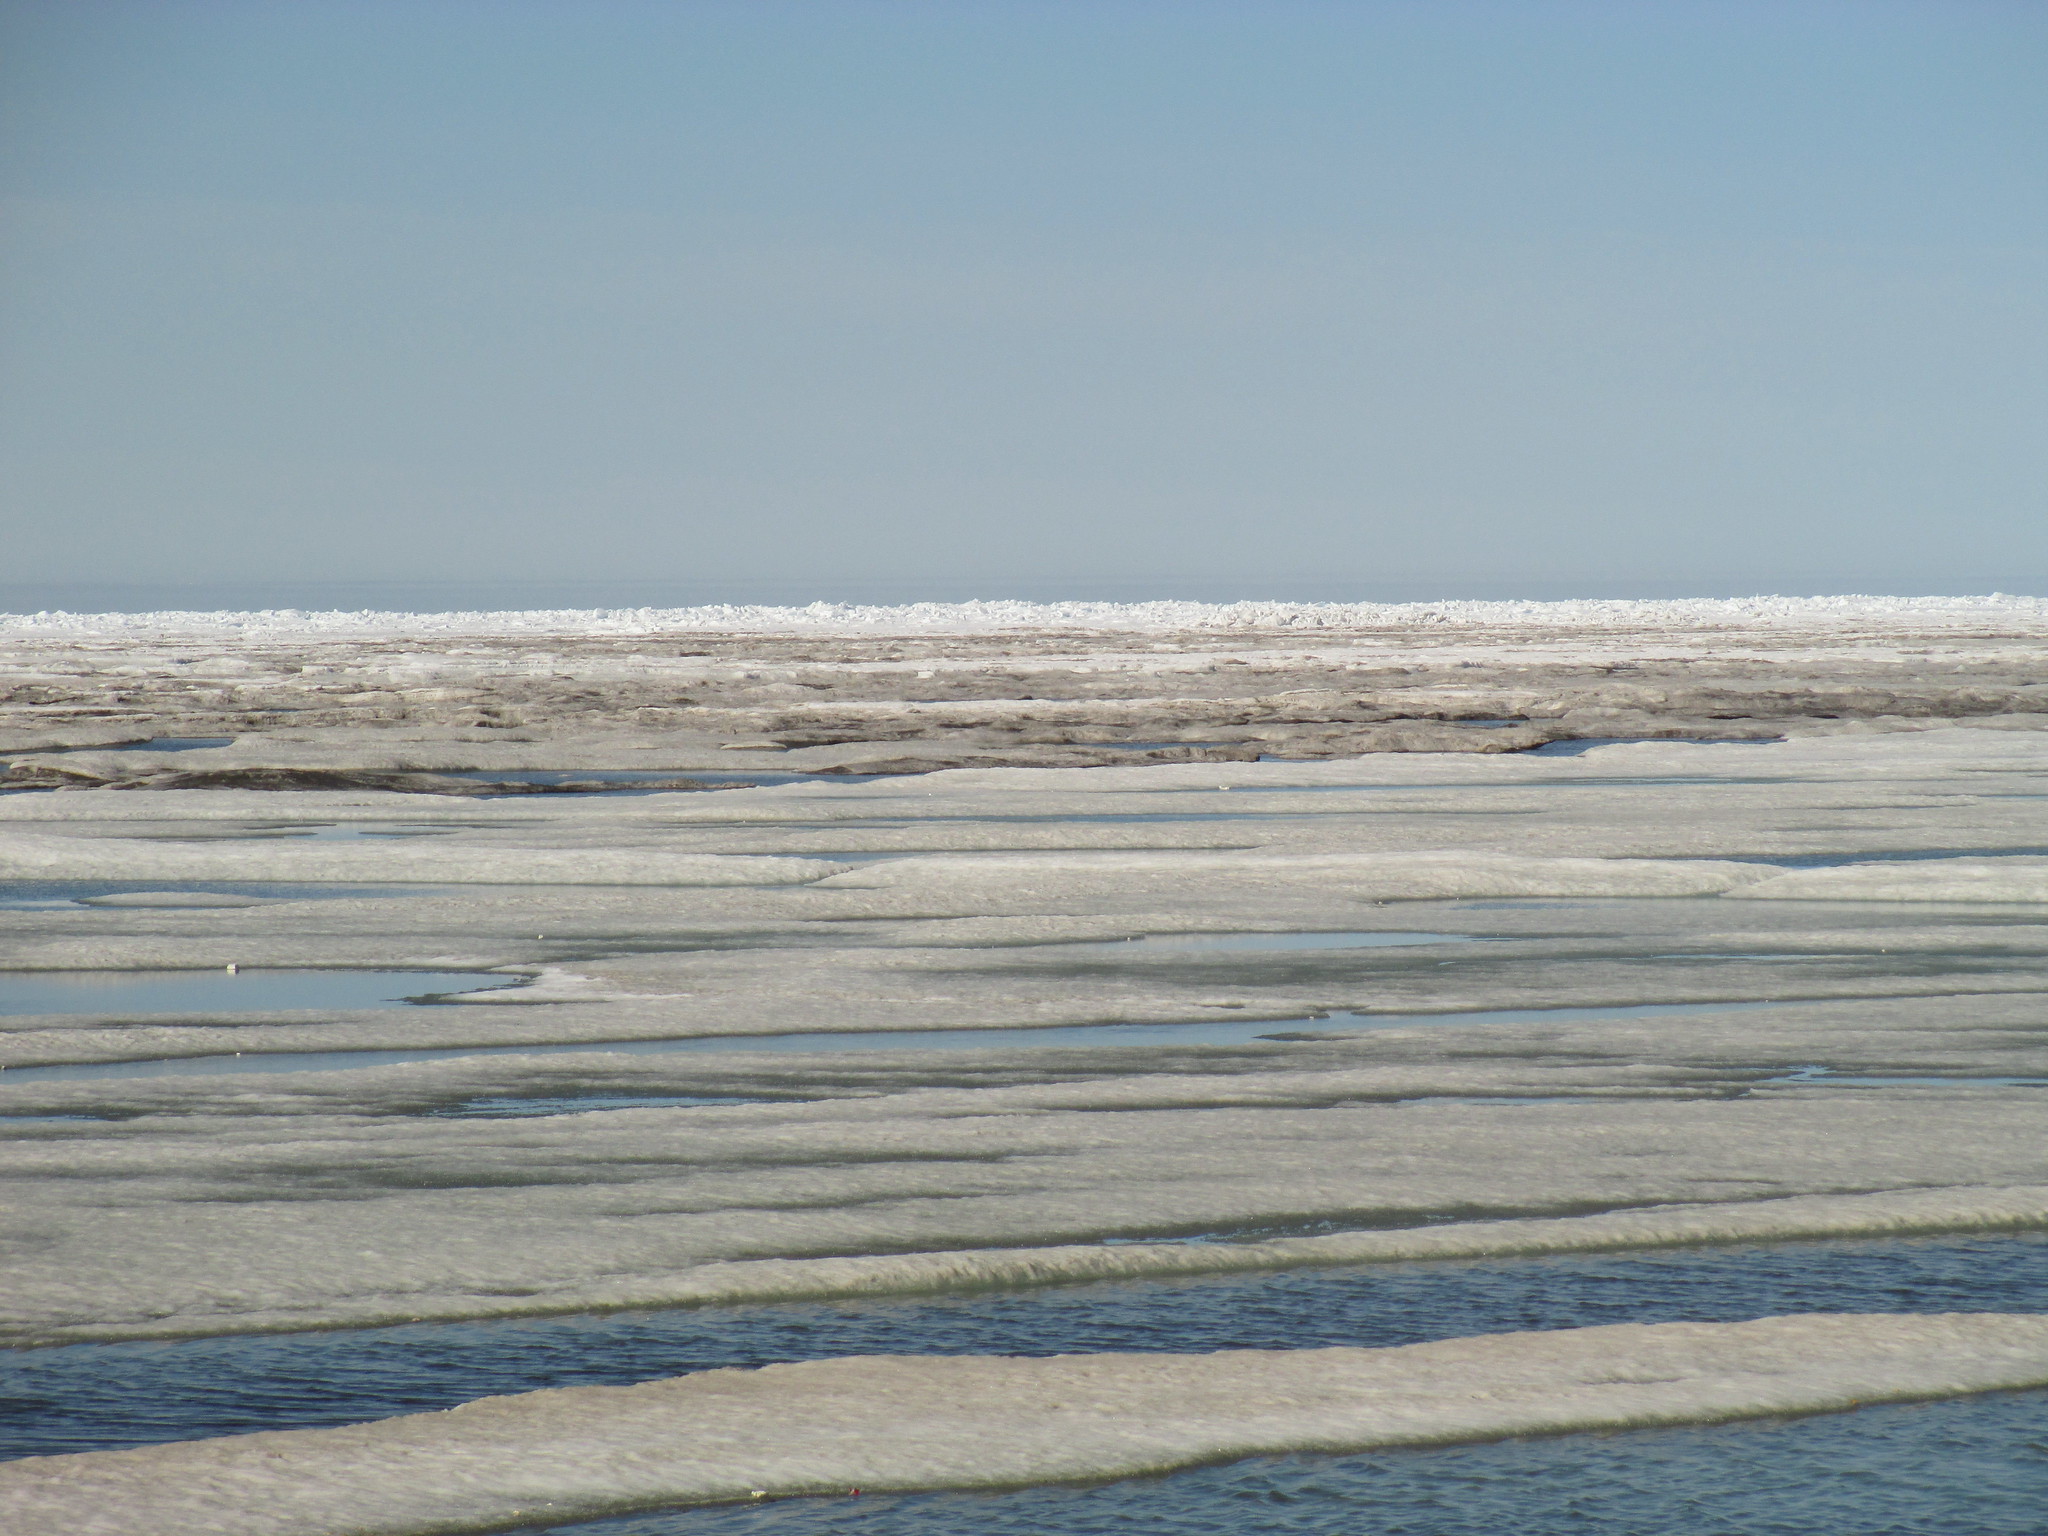 The Arctic Ocean near Barrow, officially known as Utqiaġvik, in late June 2012. Image courtesy of the U.S. Department of Energy Atmospheric Radiation Measurement (ARM) user facility.